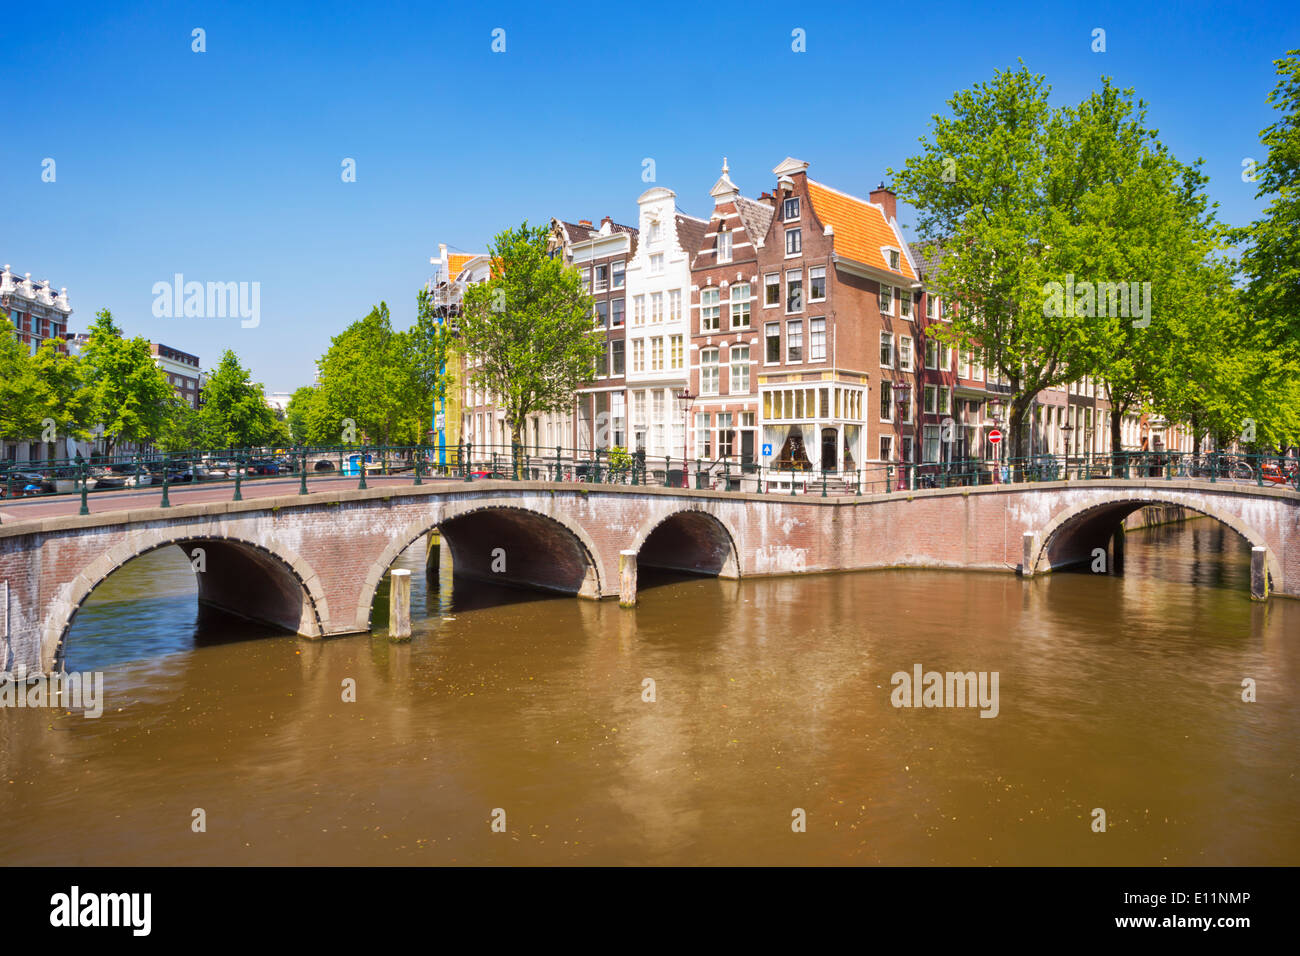 Bridges and houses along a canal in the city of Amsterdam, The Netherlands on a beautiful sunny day Stock Photo